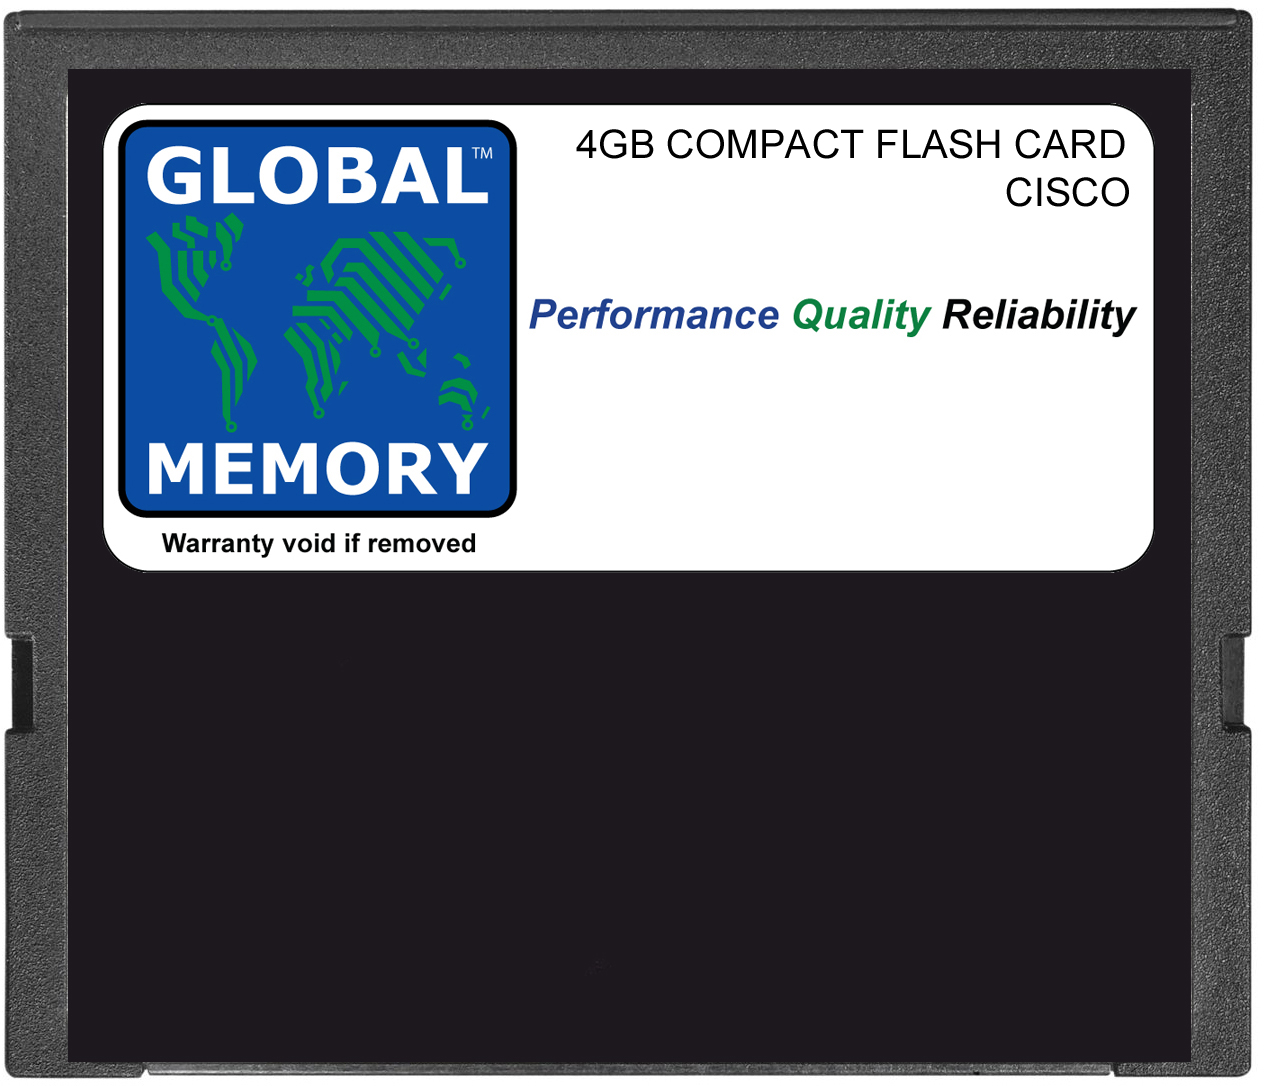 4GB COMPACT FLASH CARD MEMORY FOR CISCO 1900 / 2900 / 3900 SERIES ROUTERS (MEM-CF-4GB) - Click Image to Close